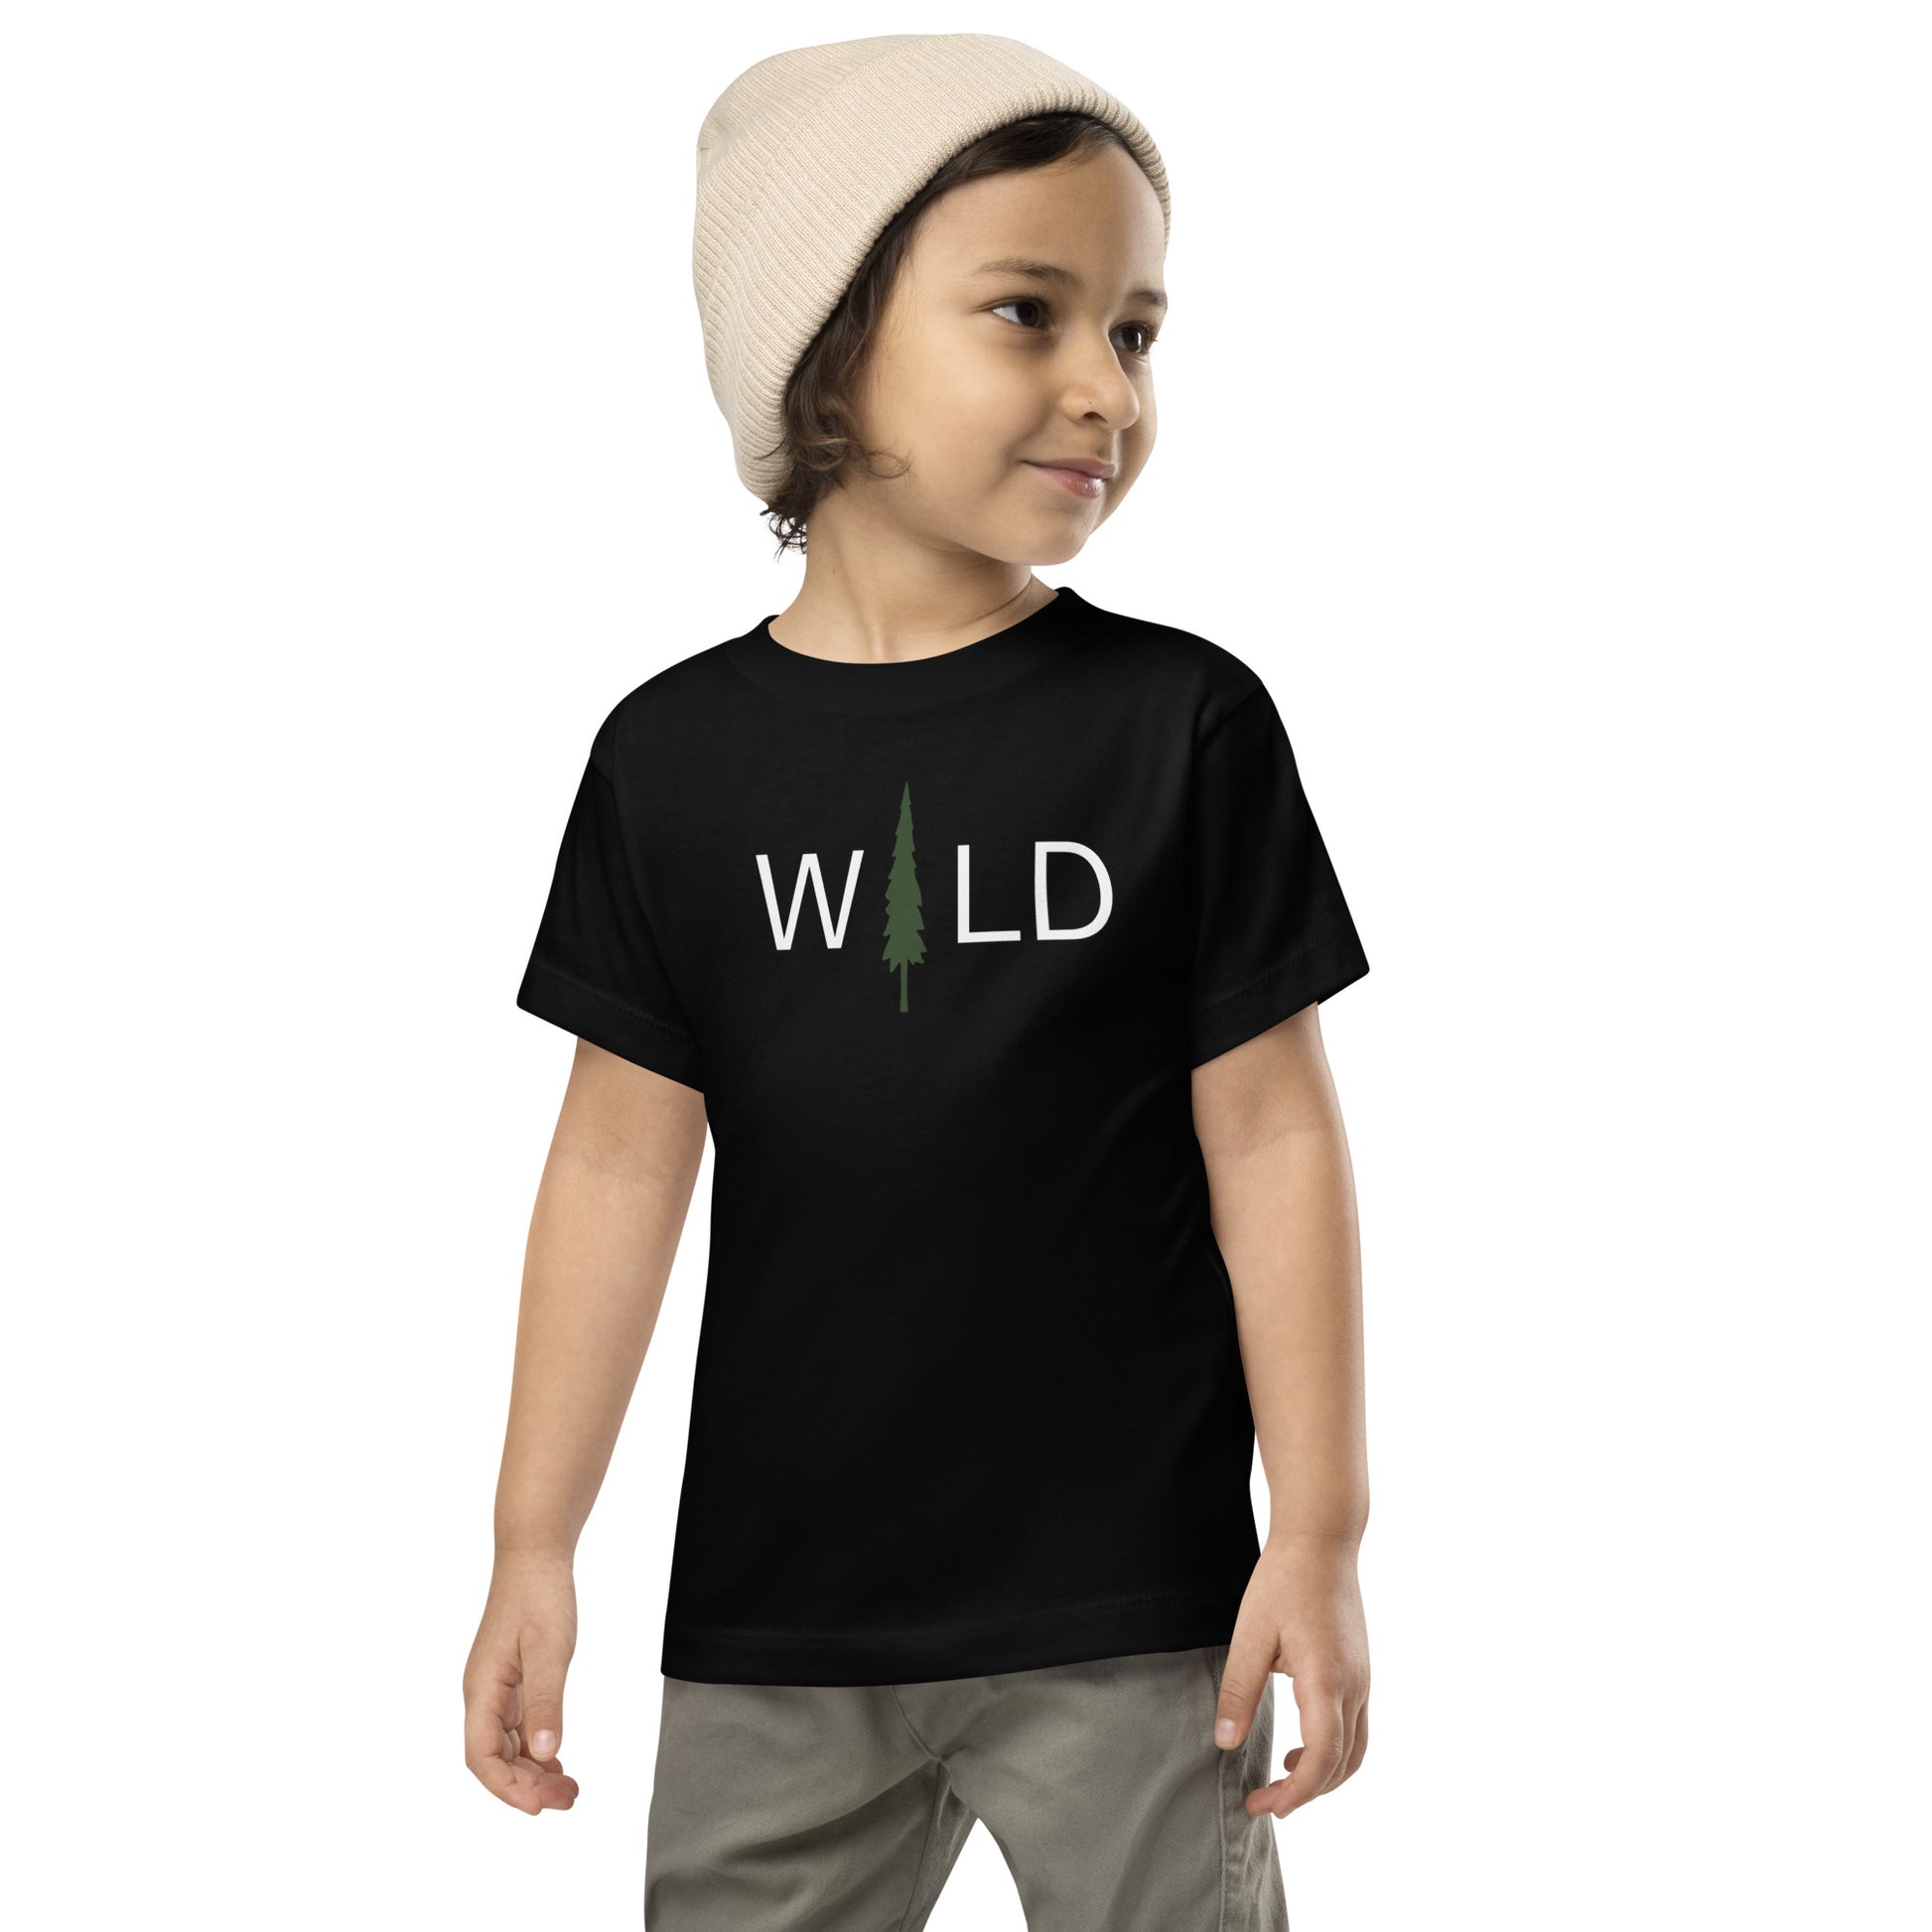 tree forest wild outdoor kid child nature explore outside free mountain hiking